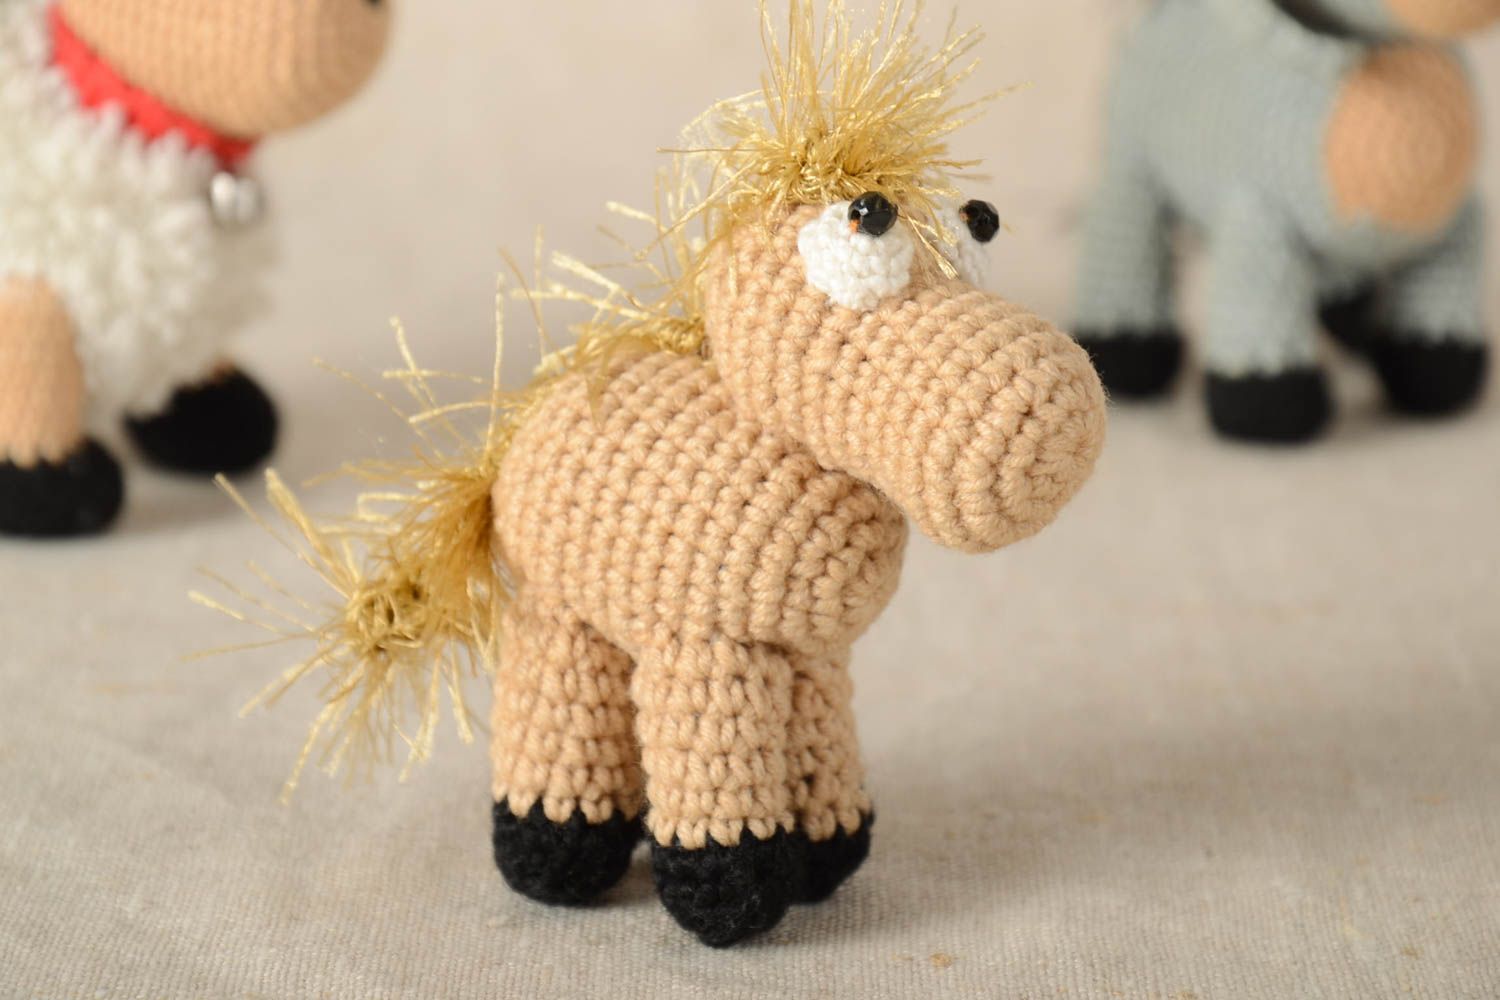 Cute crocheted horse handmade decorative toy soft toy textile designer toy photo 1